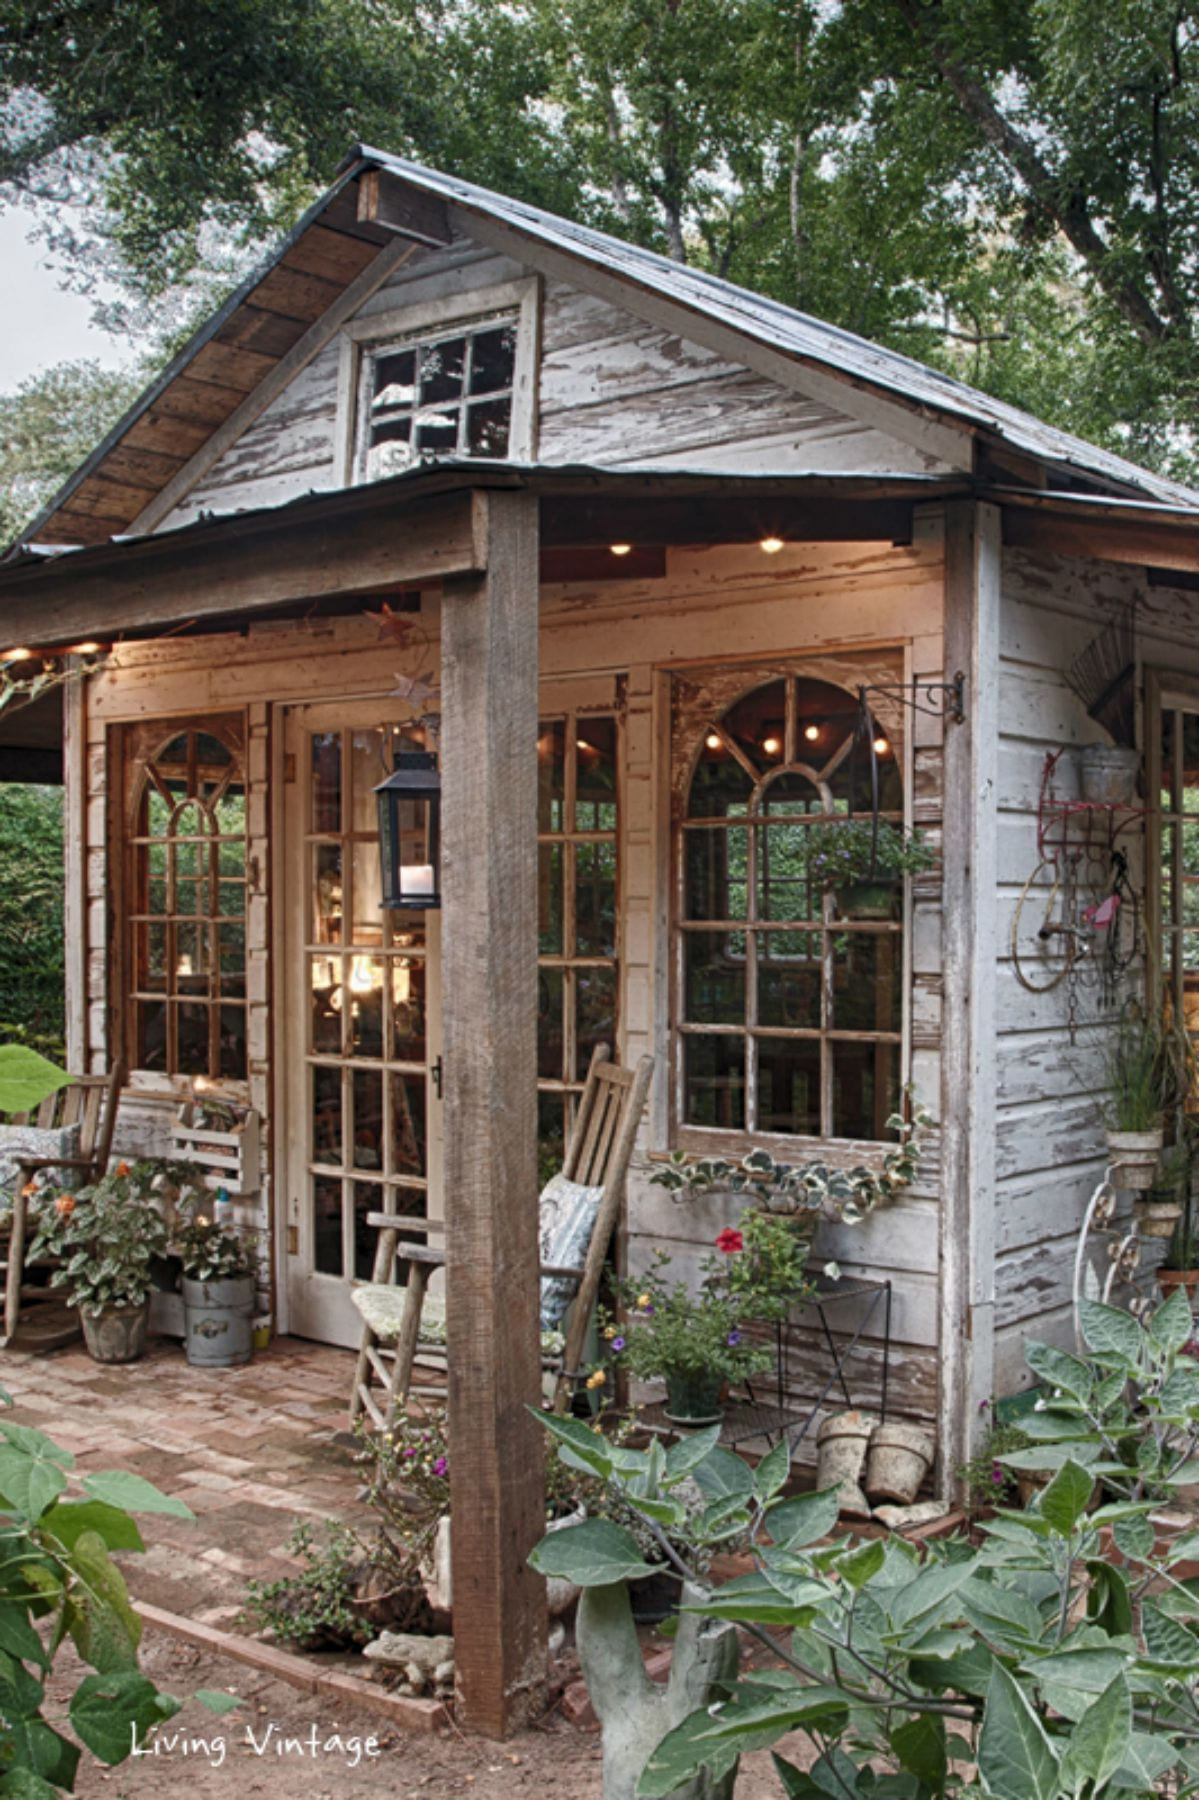 Simphome.com whimsical garden shed designs storage shed for 2020 2021 2022